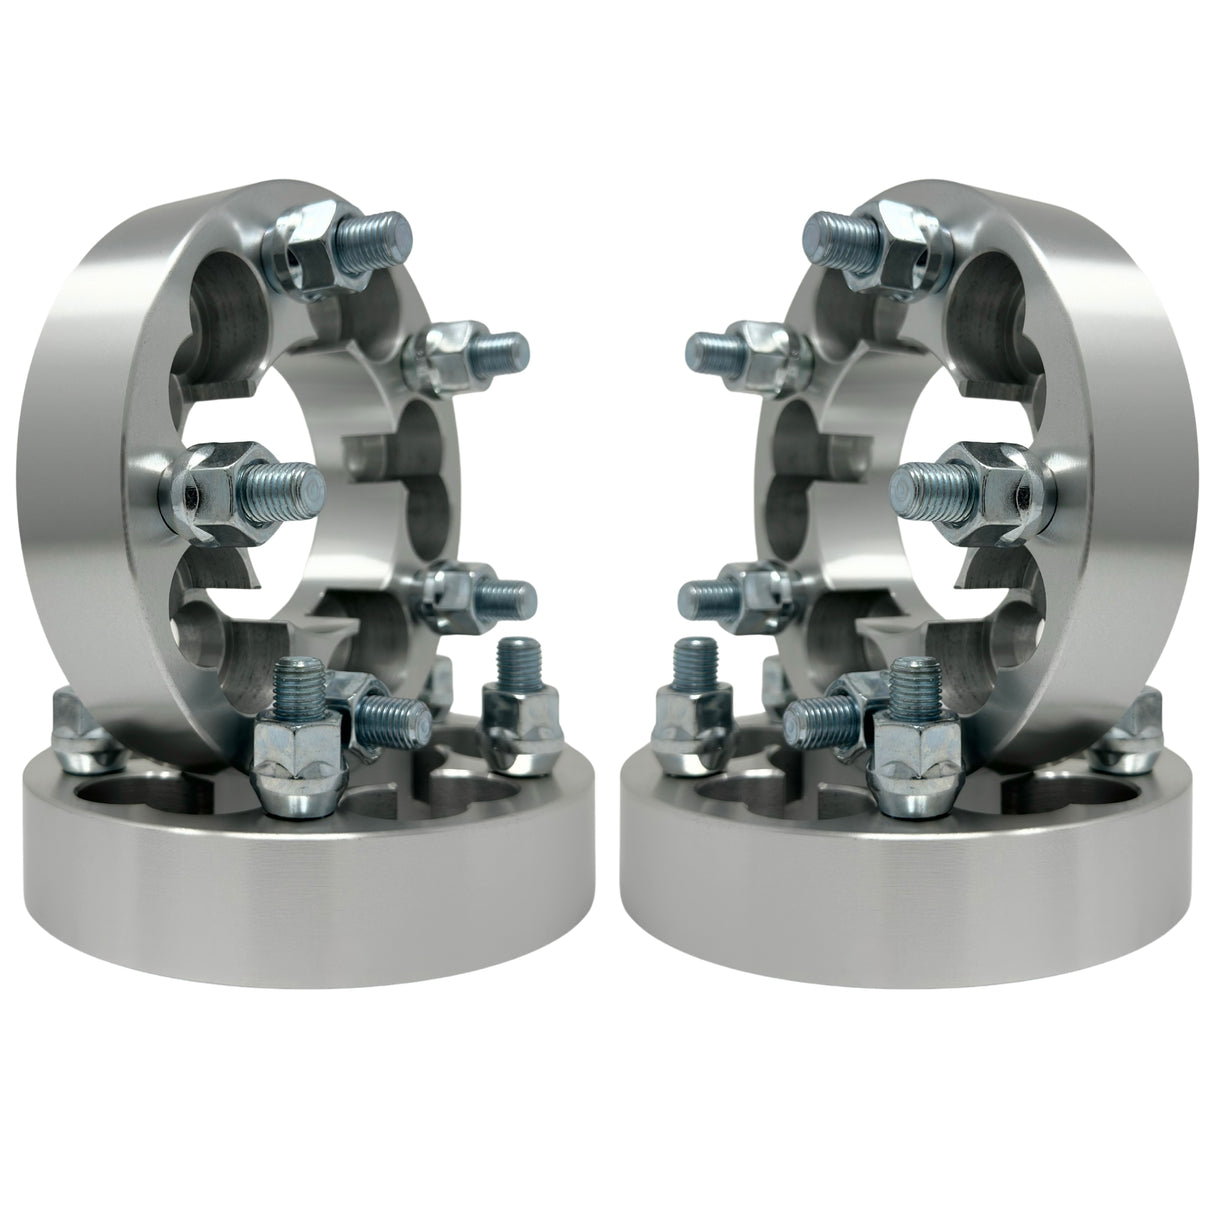 5x114.3 or 5x120.7 to 5x100 Wheel Adapters Universal Kit 1.25" Inch (32mm) 12x1.5 Studs & Lug Nuts 74mm Center Bore | 5x4.5 or 5x4.75 to 5x100